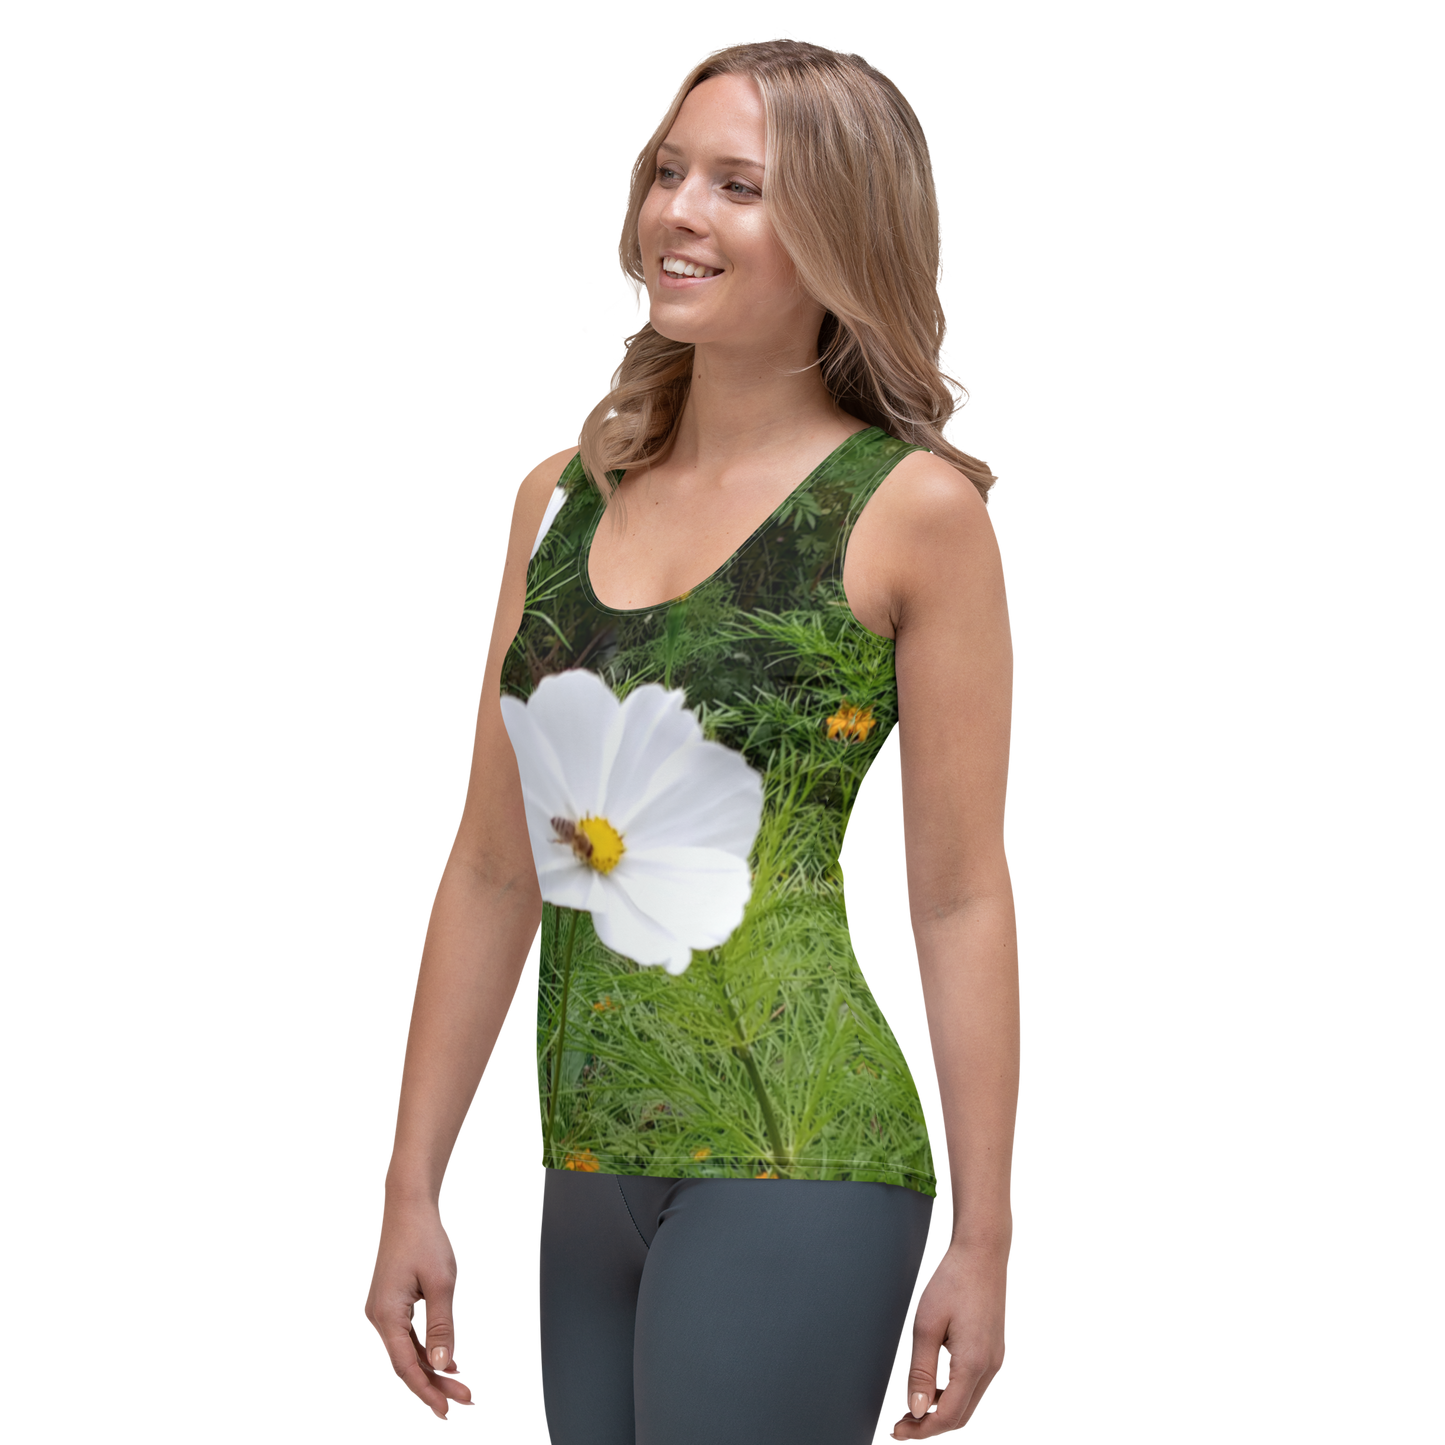 The FLOWER LOVE Collection - "Captivating Cosmos" Design Tank Top